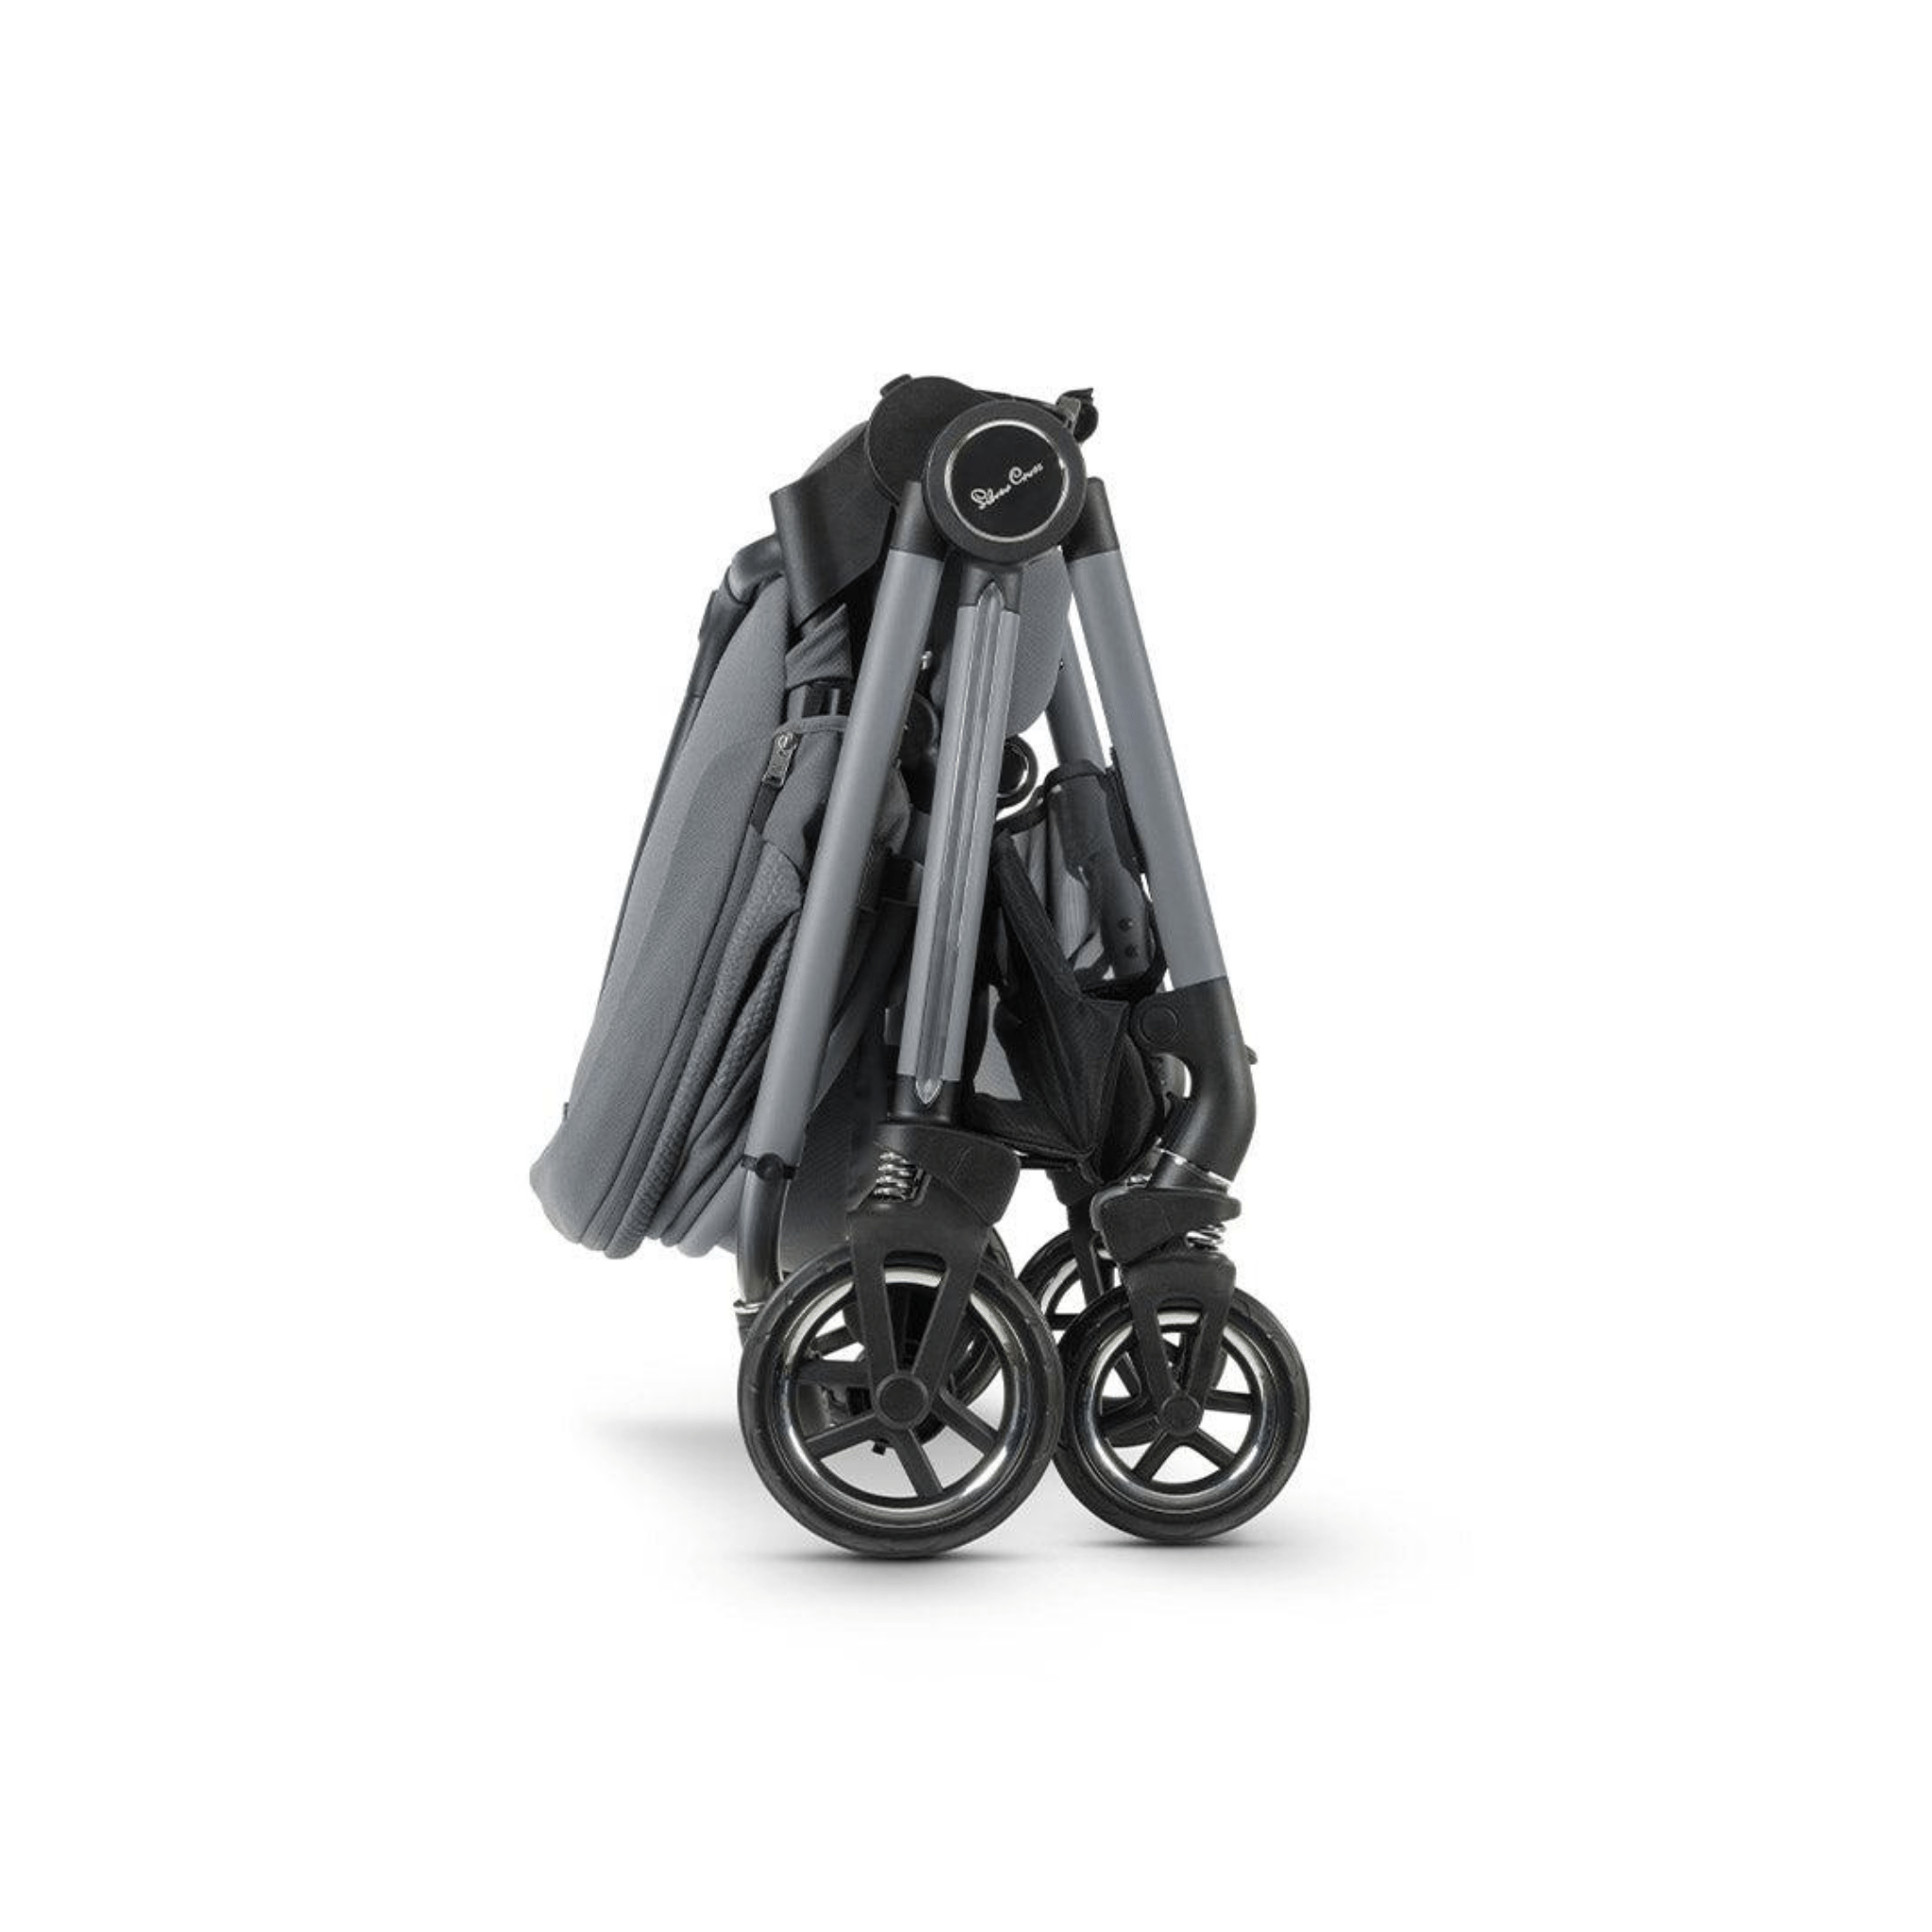 Silver Cross travel systems Silver Cross Dune Travel System with Newborn Pod - Glacier KTDT.GL2